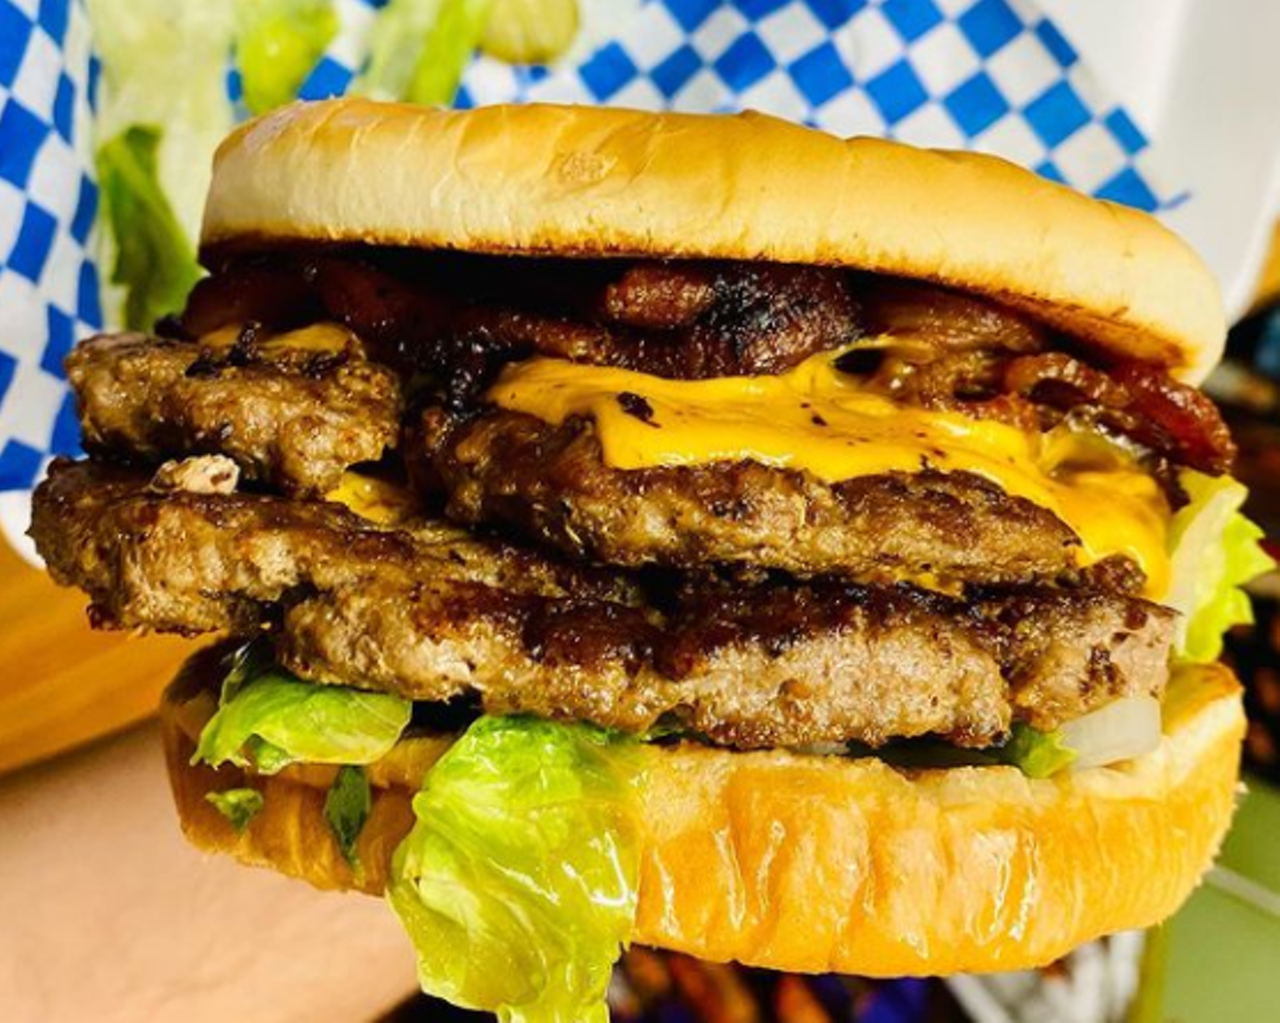 Armadillo’s Texas Style Burgers
Multiple locations, armadilloburger.com
Known for their specialty Texas-sized 1 ½ pound and 3 pound burgers, Armadillo’s is sure to satisfy even the biggest of appetites. Don’t worry, they have regular-sized burgers too.
Photo via Instagram / bexarbites.sa